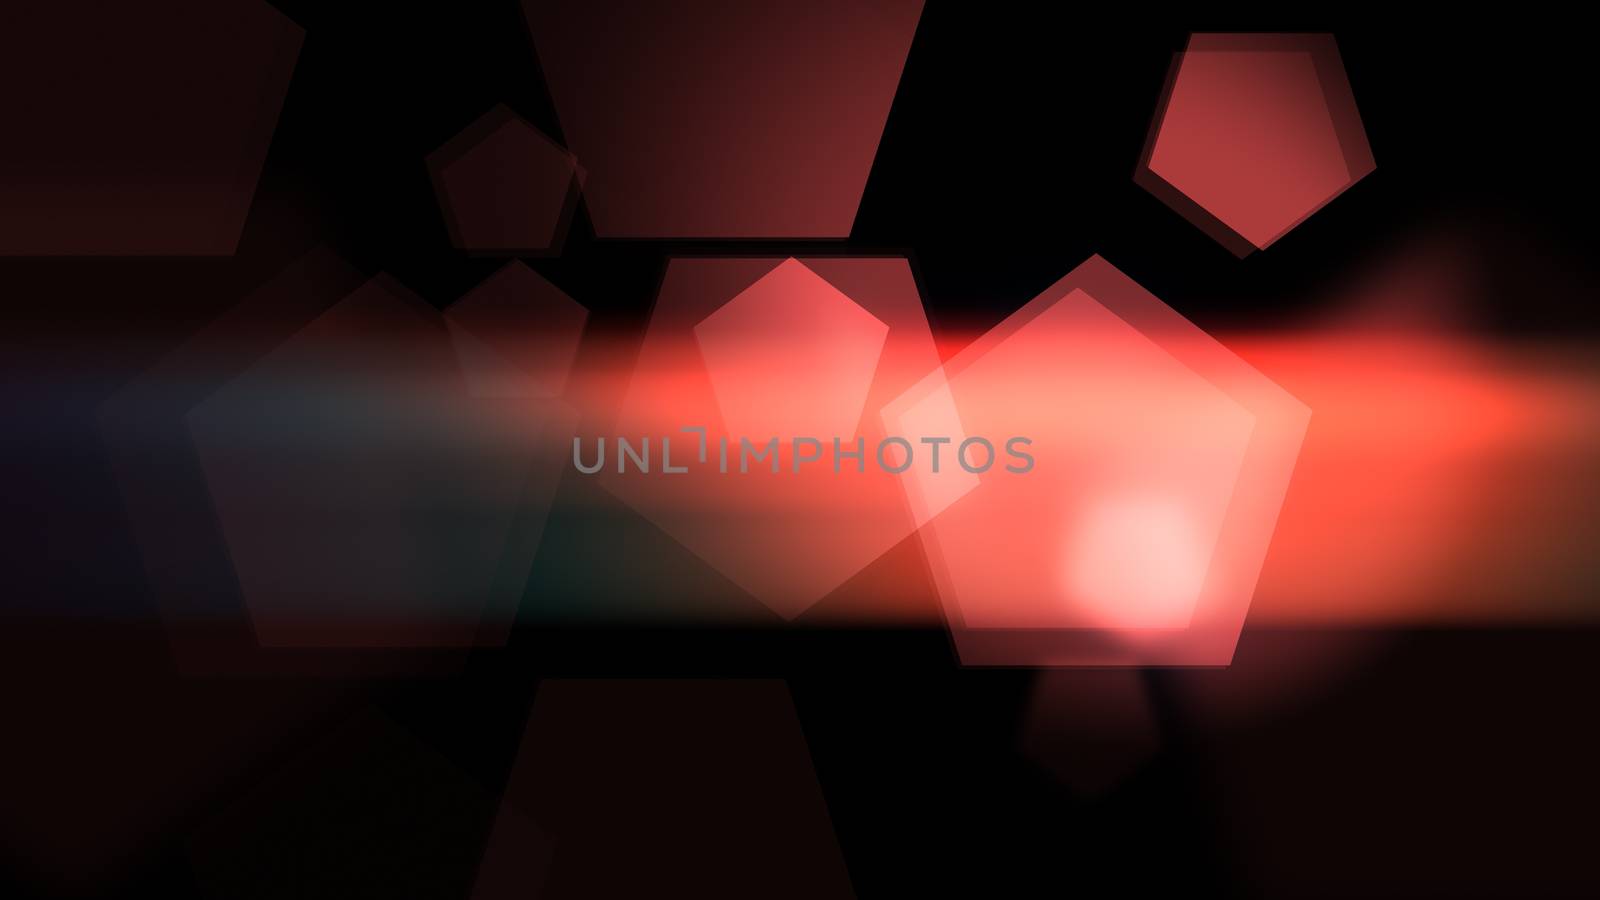 2d illustration of Smooth red abstract pentagons background on the dark. 